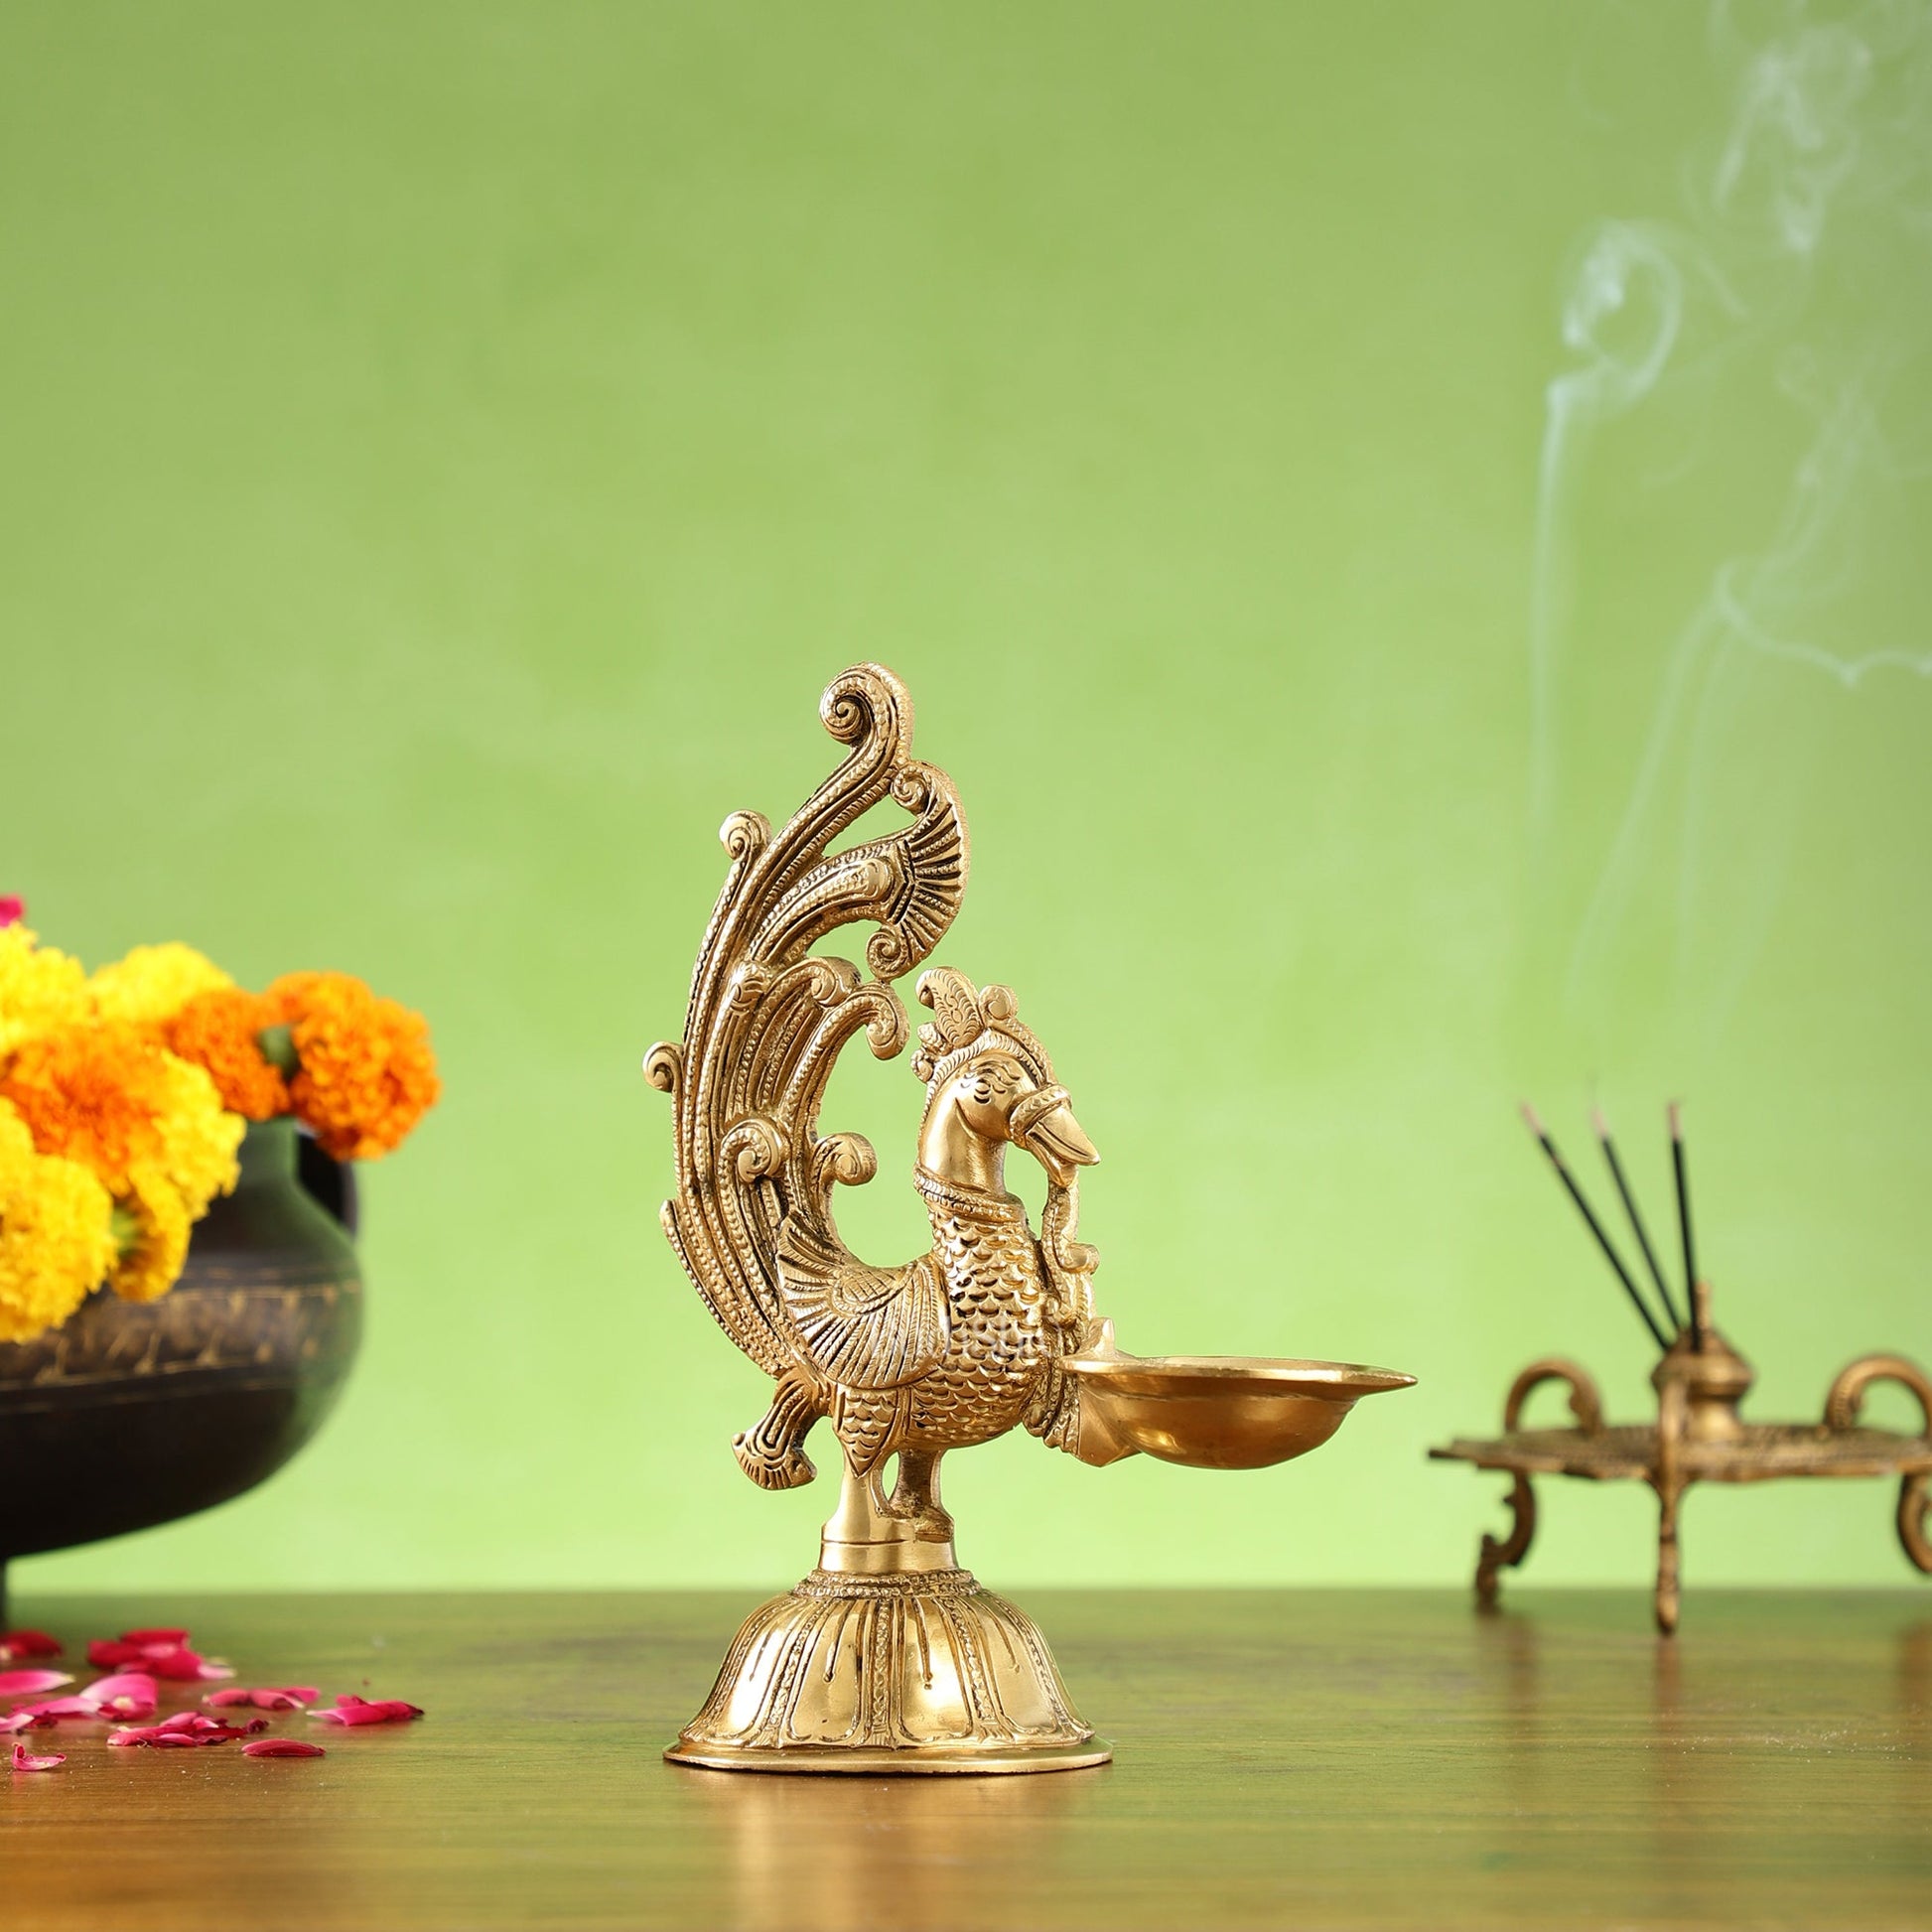 Peacock Brass Oil Lamps | Open Feather Design | Height 8 inches - Budhshiv.com